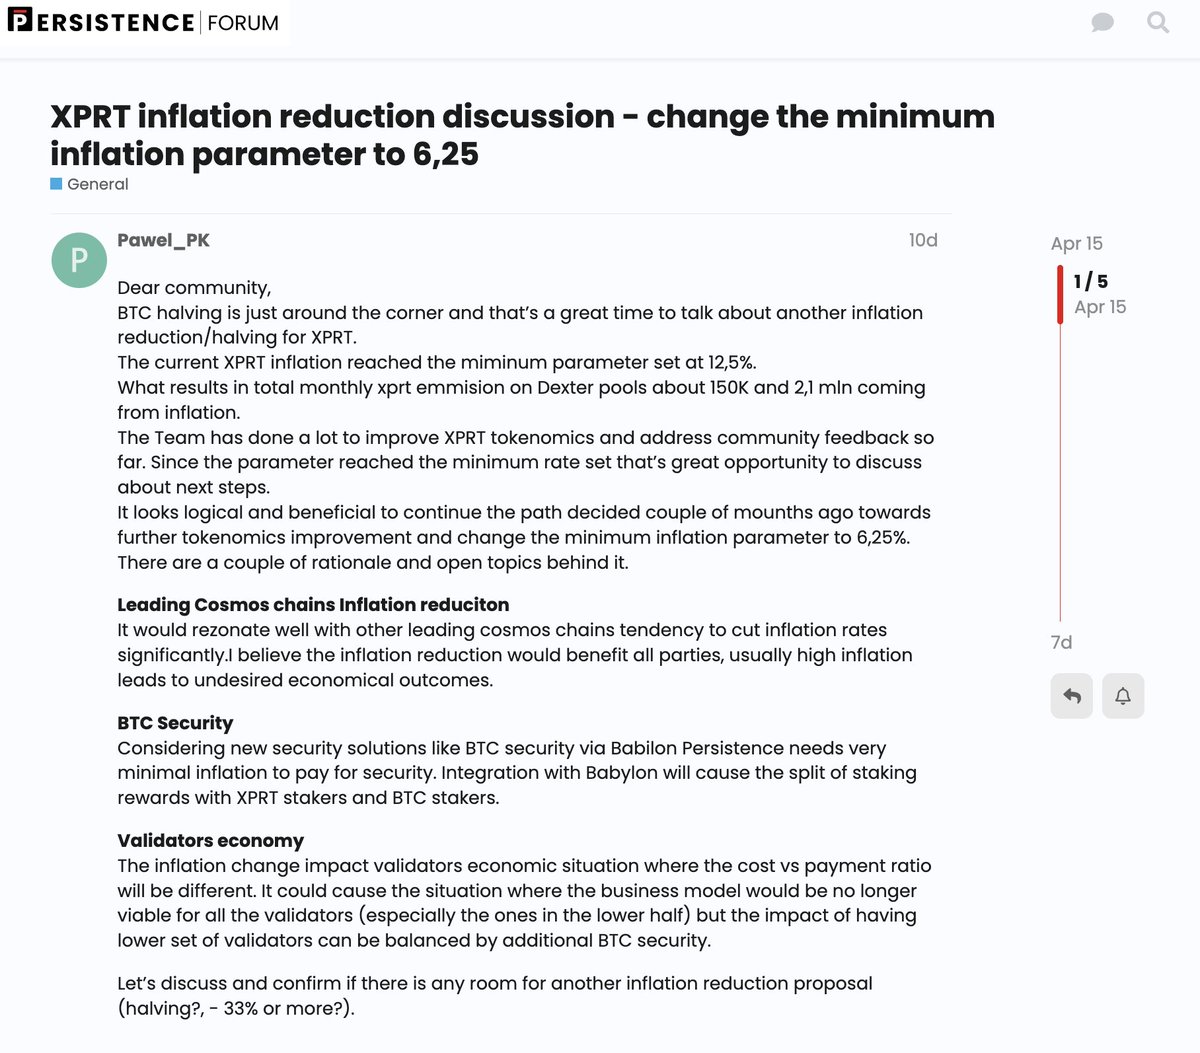 [Forum discussion ongoing] A discussion to reduce $XPRT inflation and change the minimum inflation parameter to 6.25% was initiated a few days ago by @Pawel_Crypto_, an active member of the Persisters community. Share your thoughts 👉 forum.persistence.one/t/xprt-inflati…